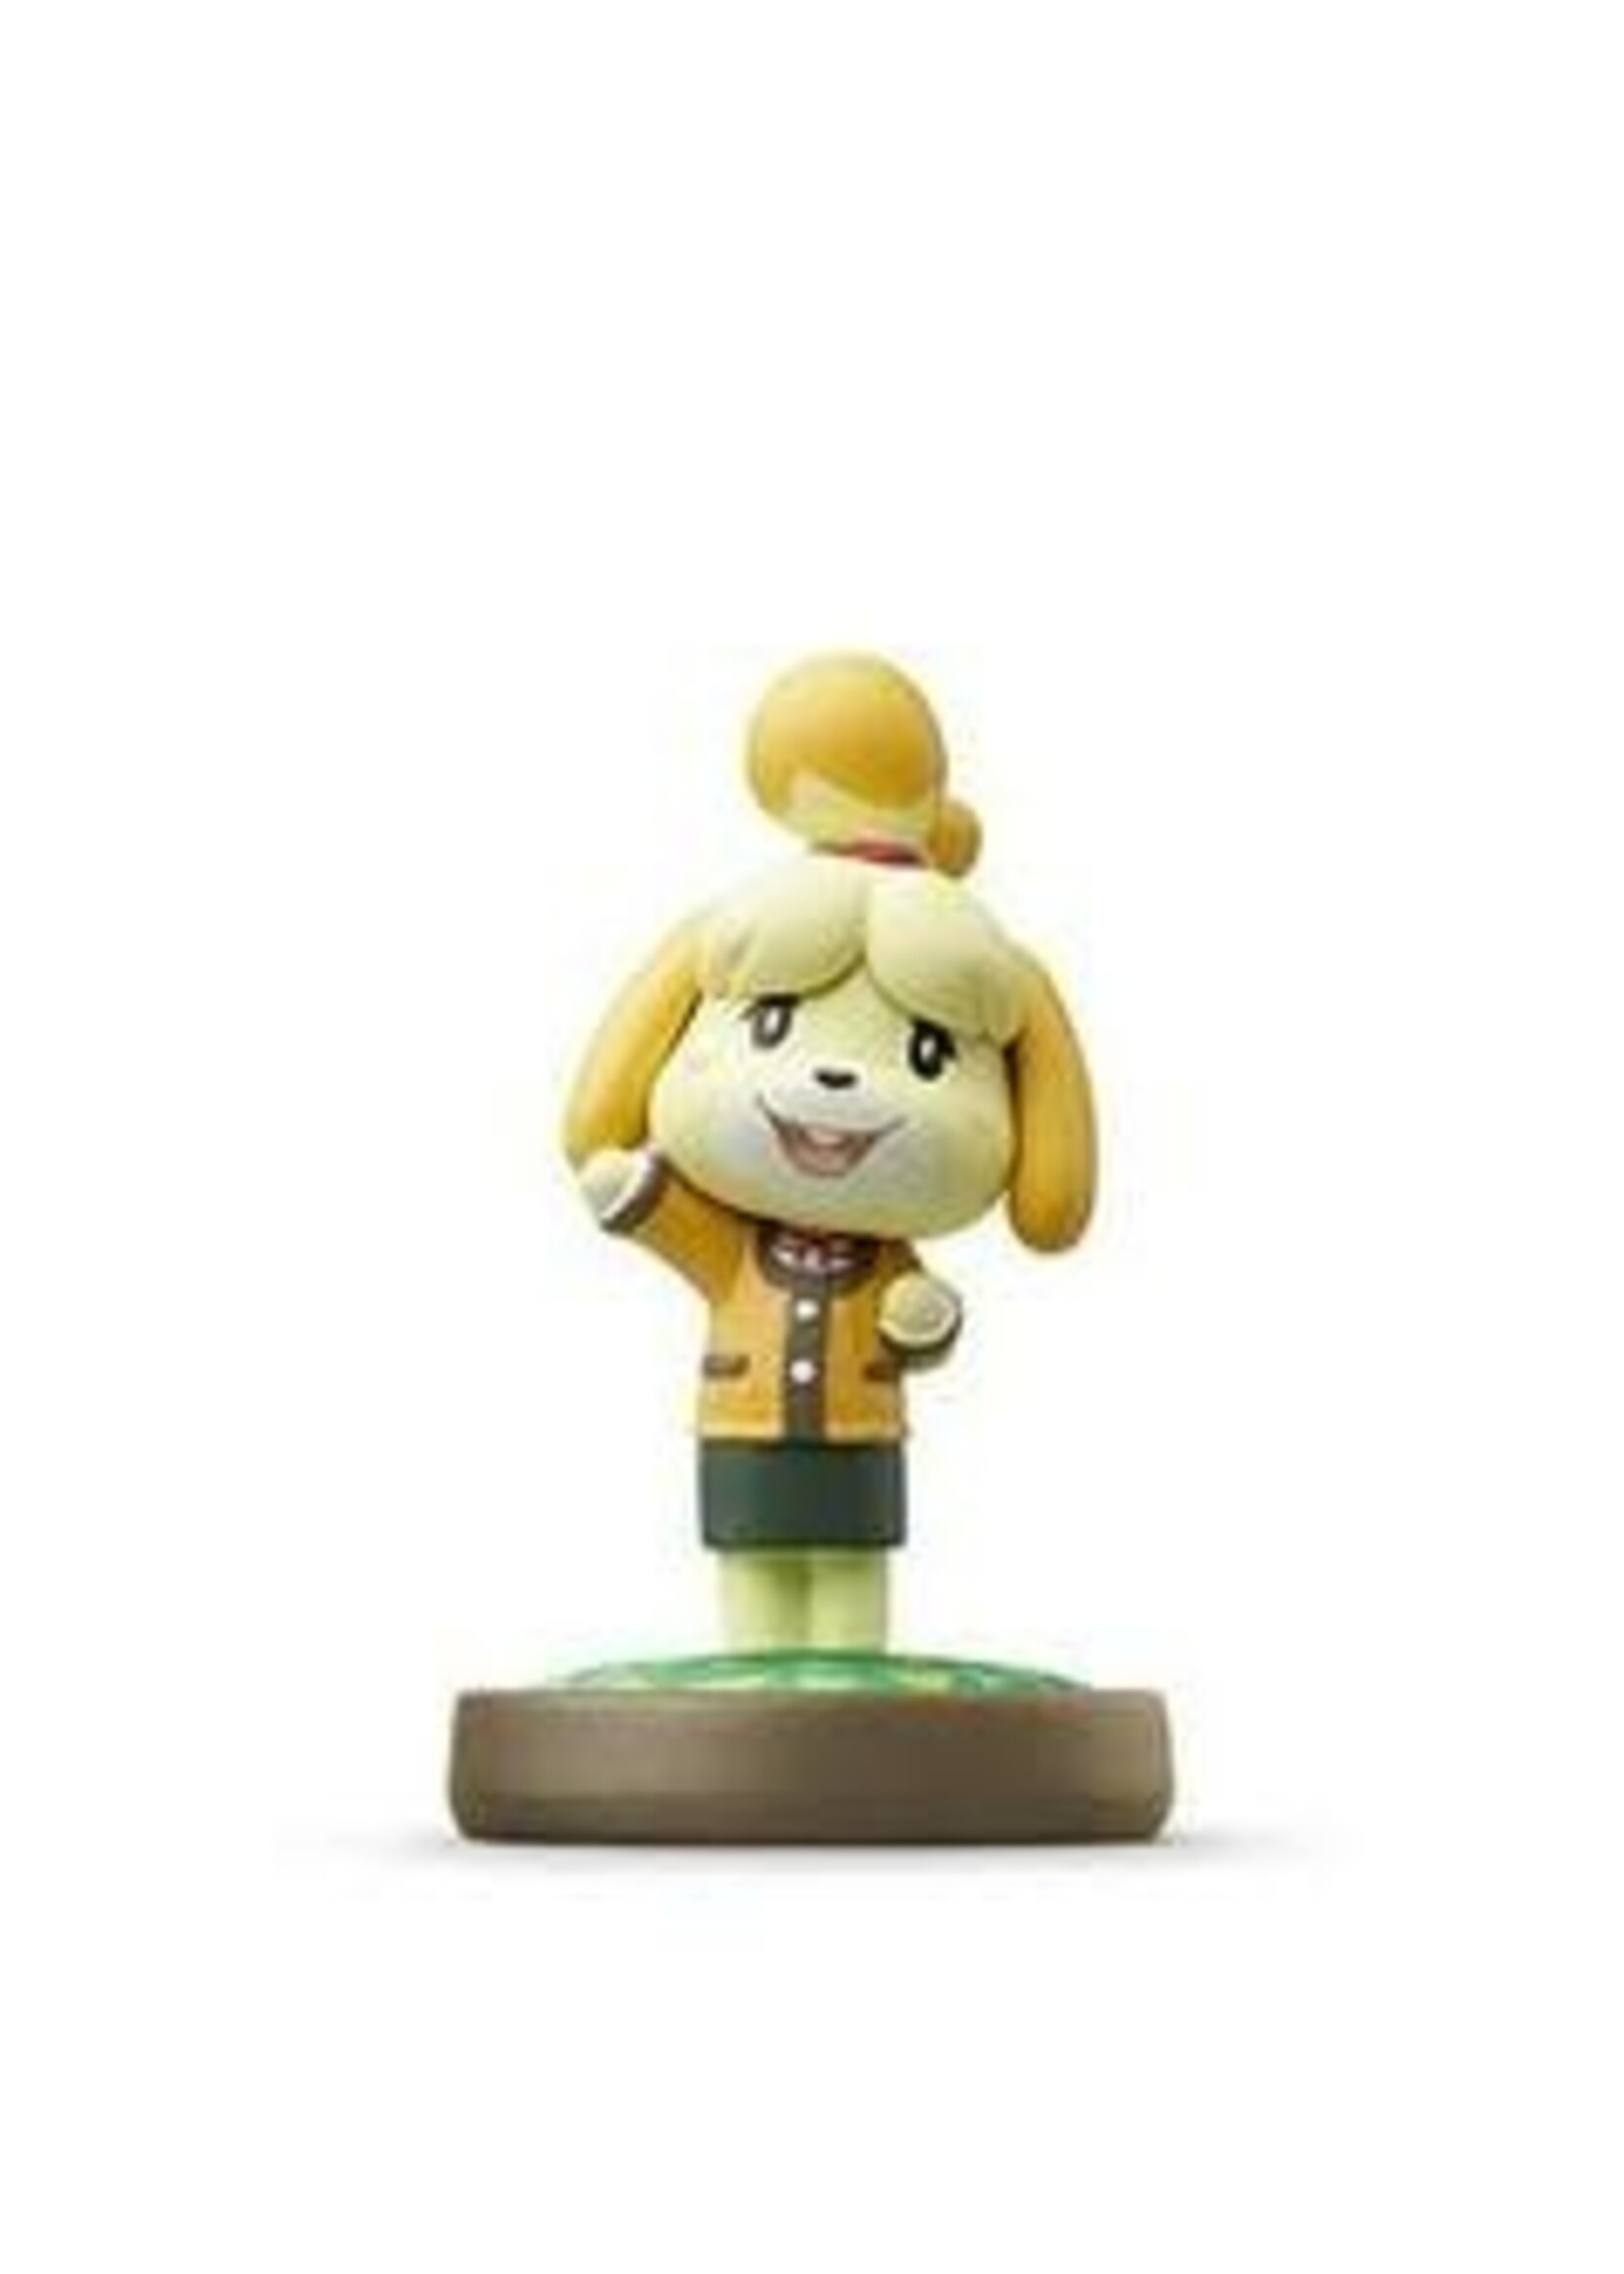 isabelle - Winter Outfit Amiibo